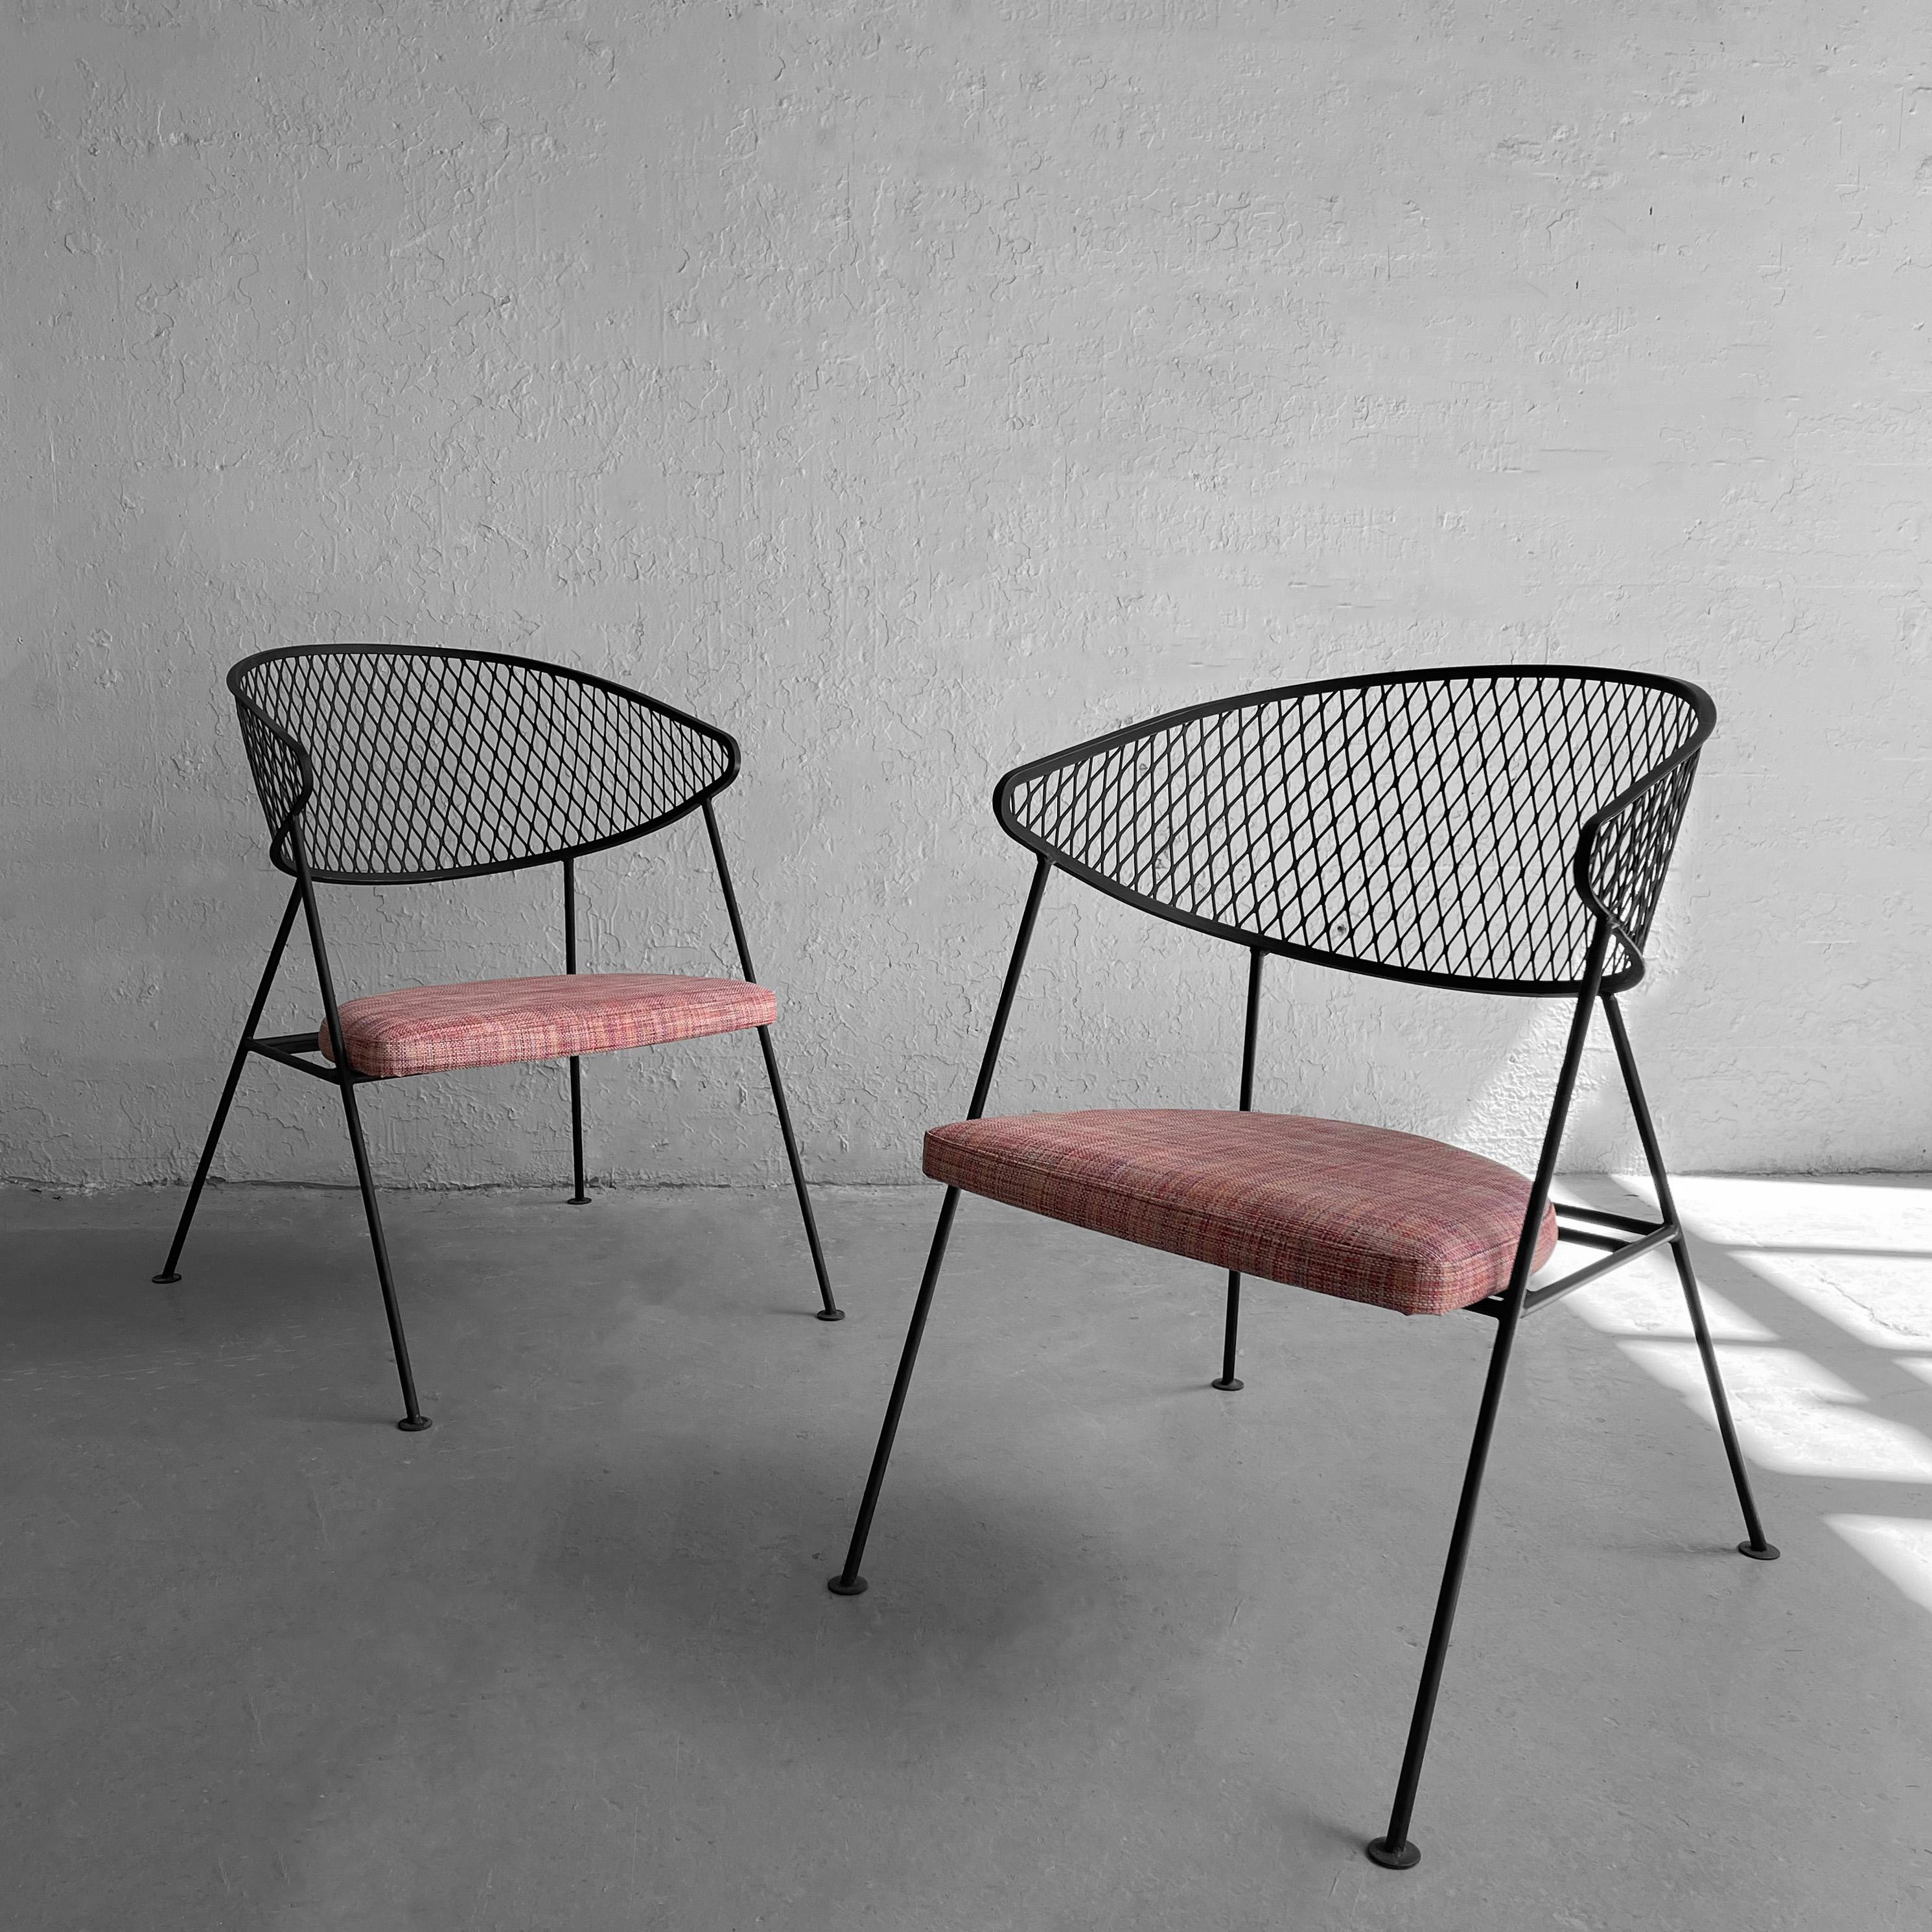 Pair of Mid-Century Modern, wrought iron, patio chairs by Maurizio Tempestini for Salterini feature mesh, demilune back rests and upholstered seats in woven raspberry outdoor vinyl.